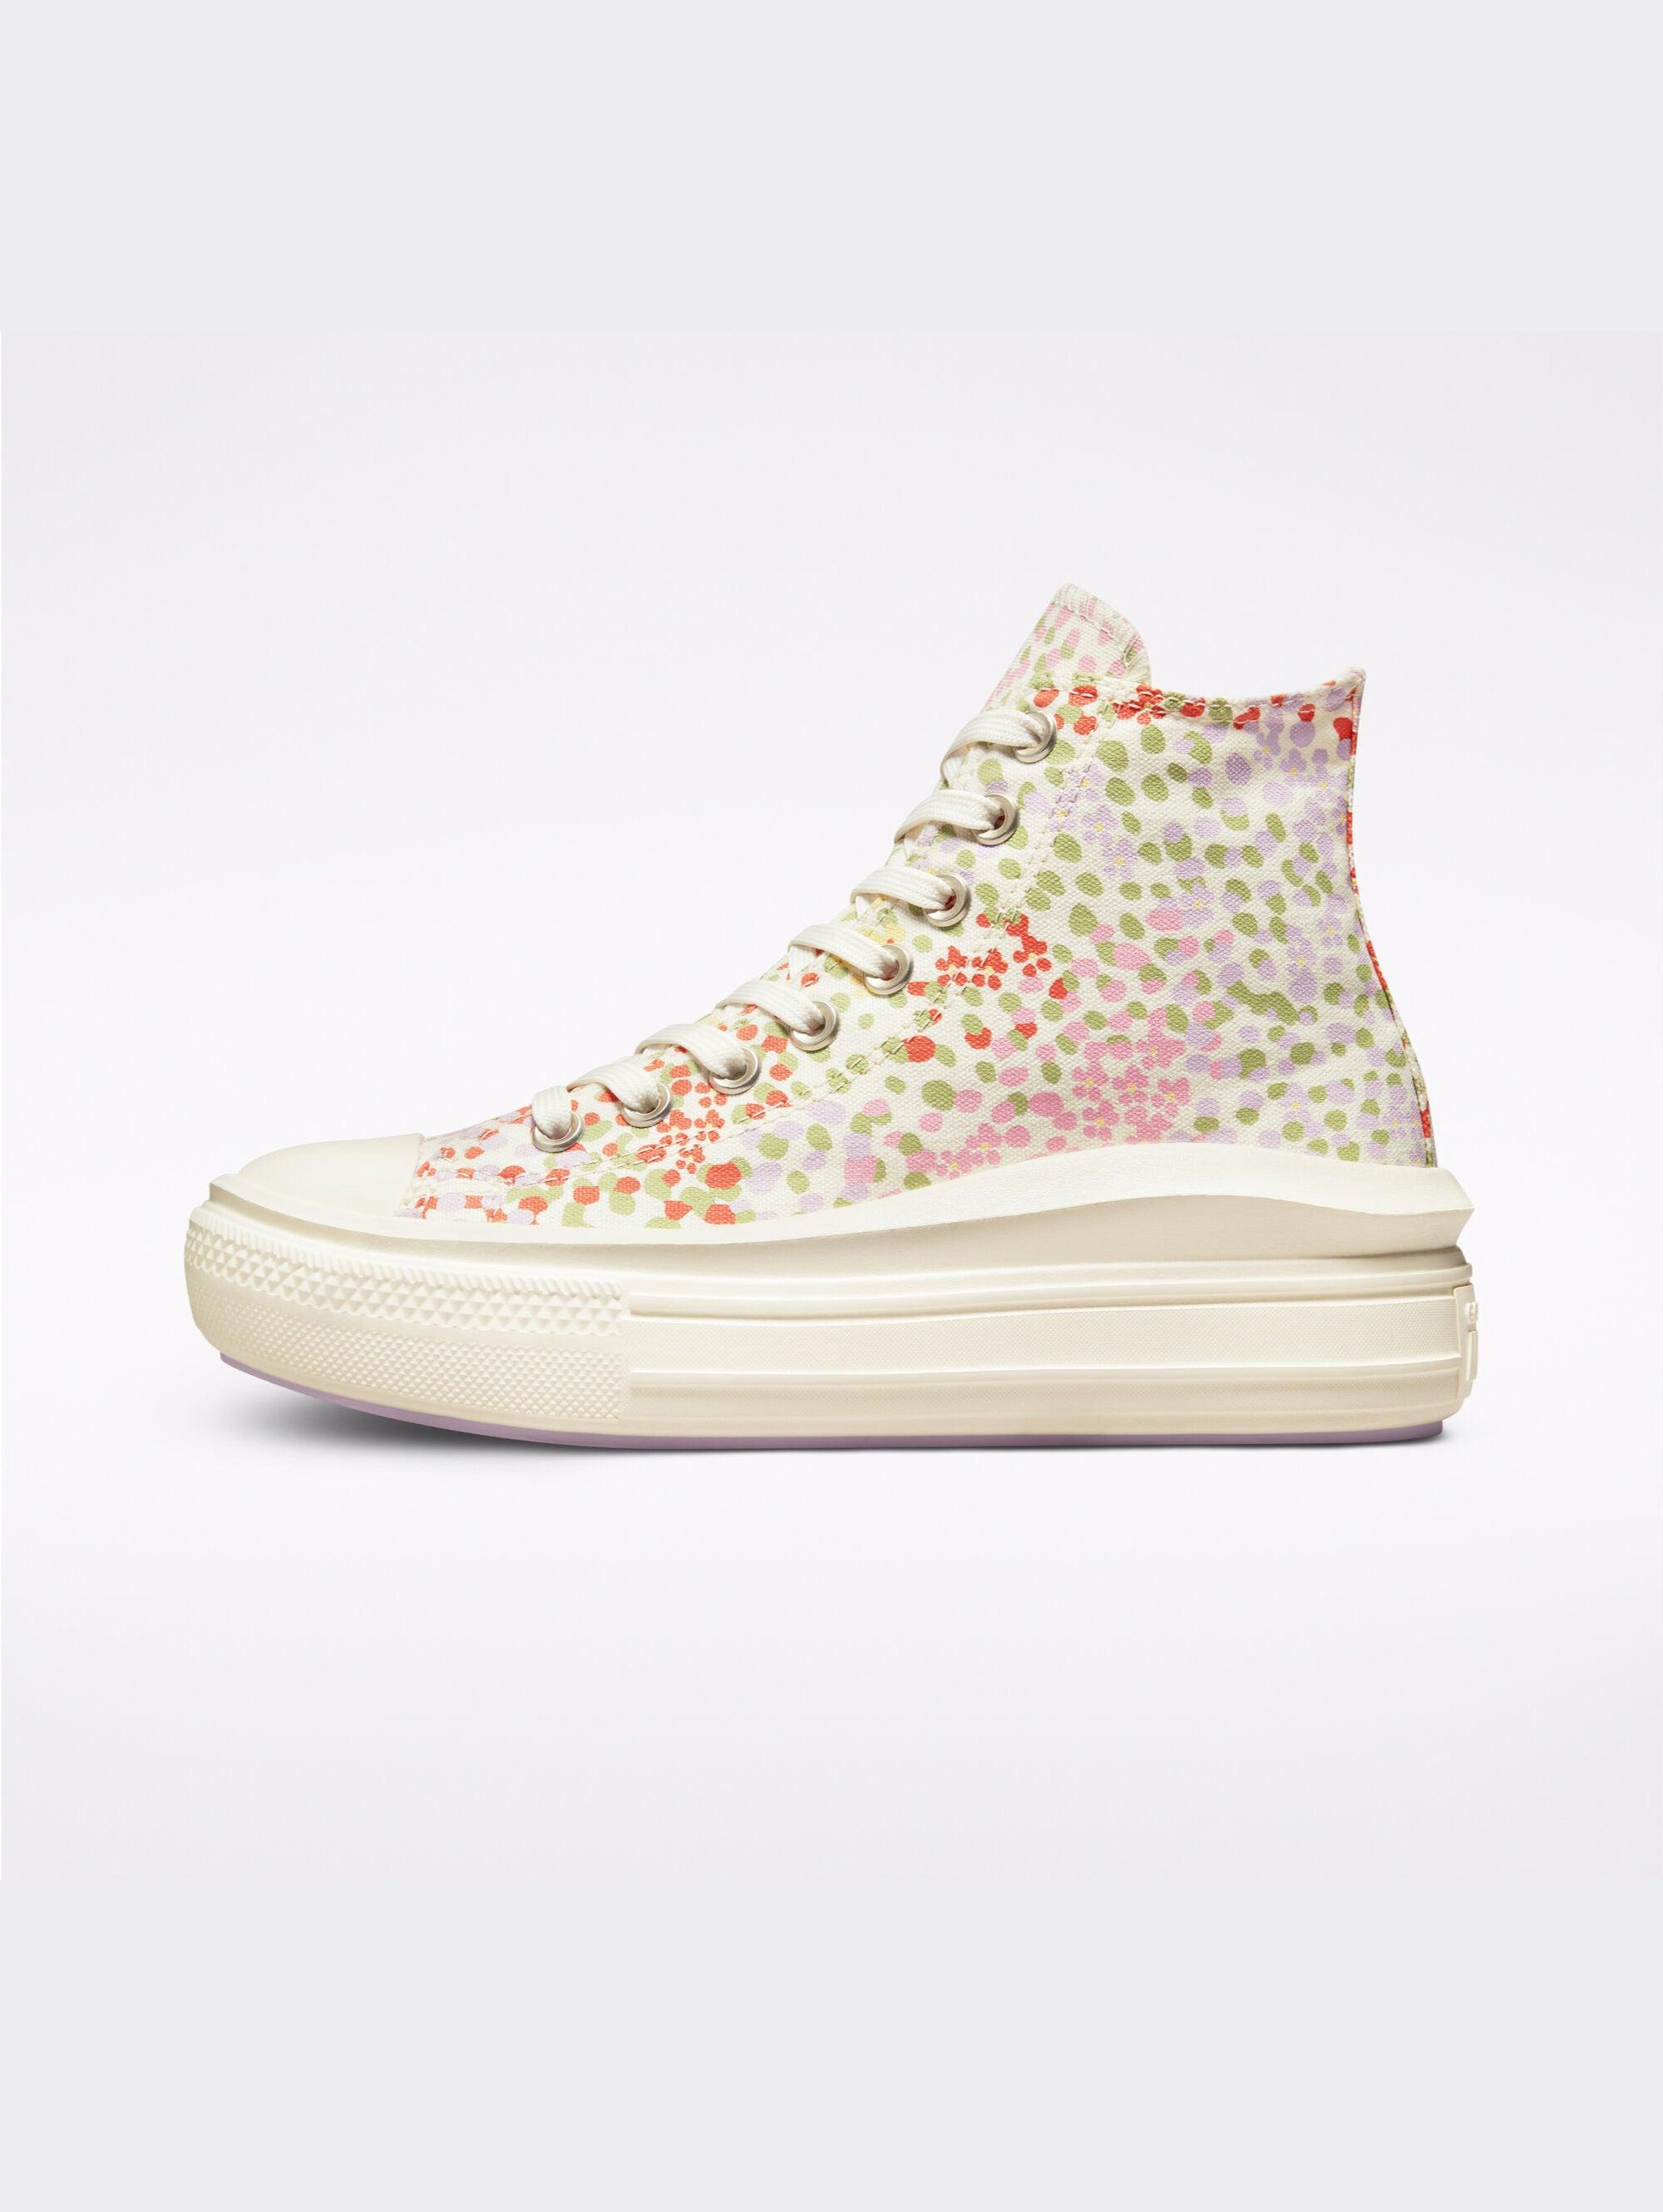 Converse Platform Sneakers With Flowers And Multicolor Polka Dots | Lyst